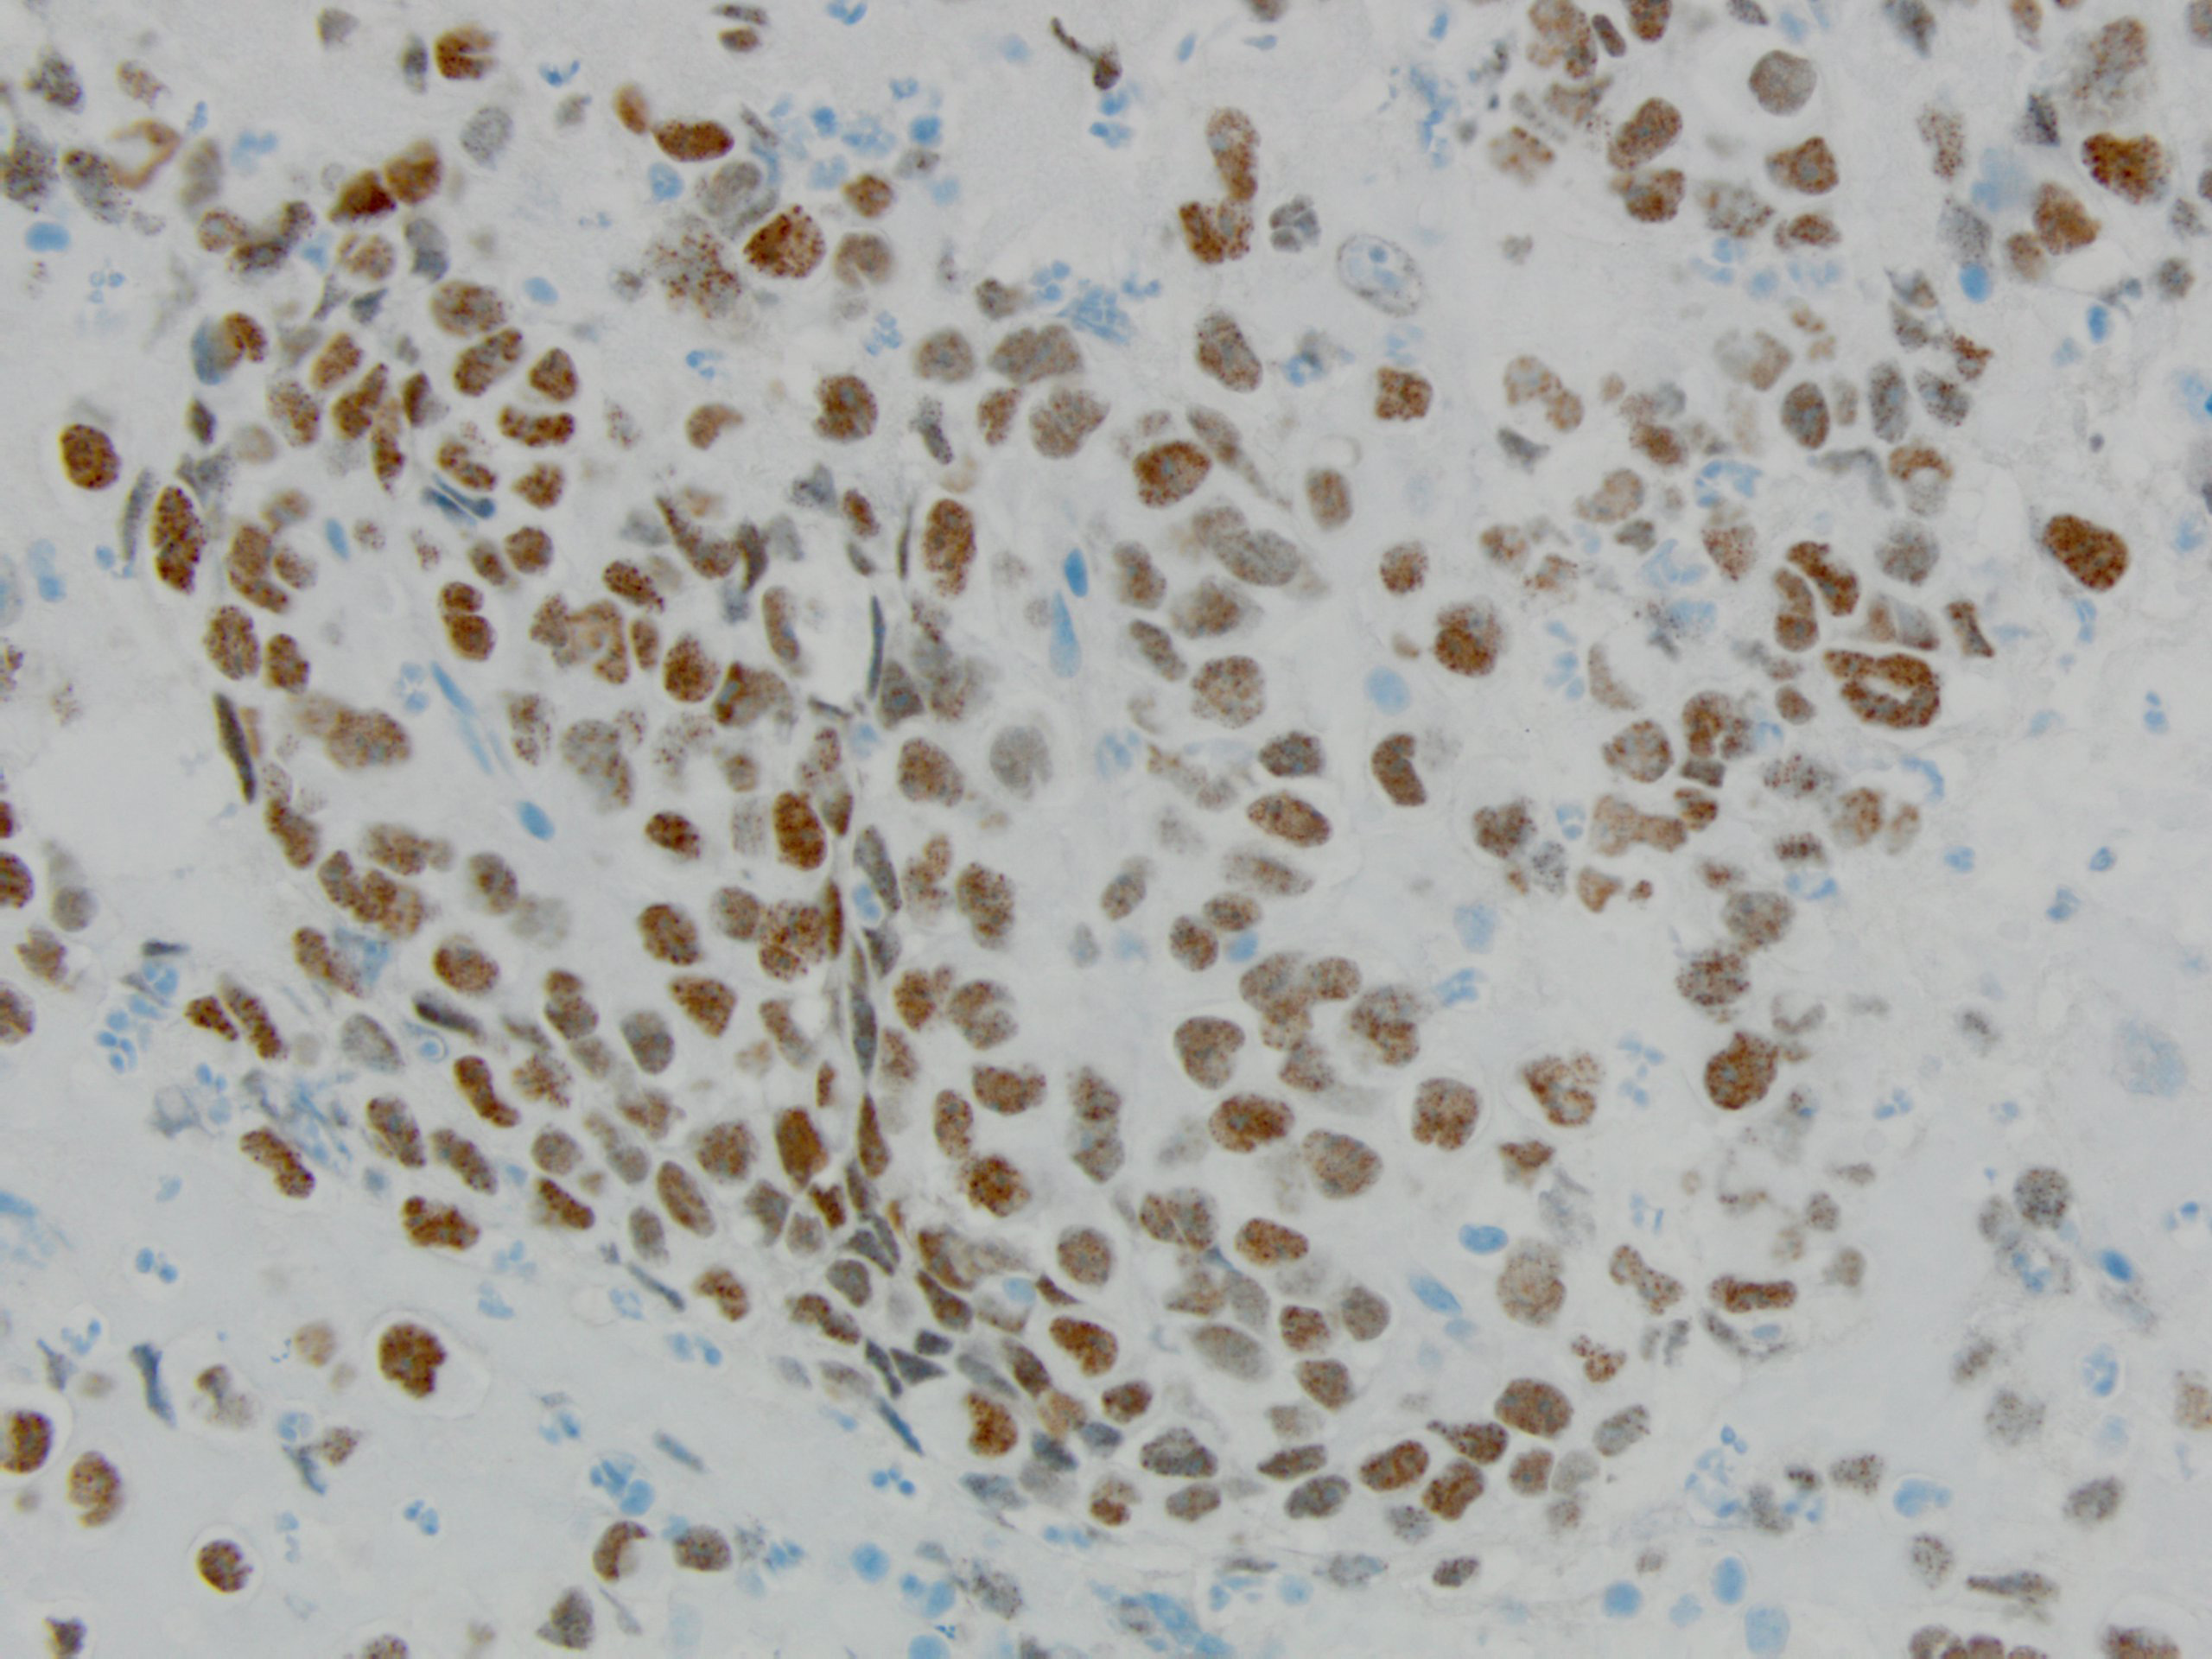 Figure 5: NUT1 immunohistochemical stain 40x magnification.